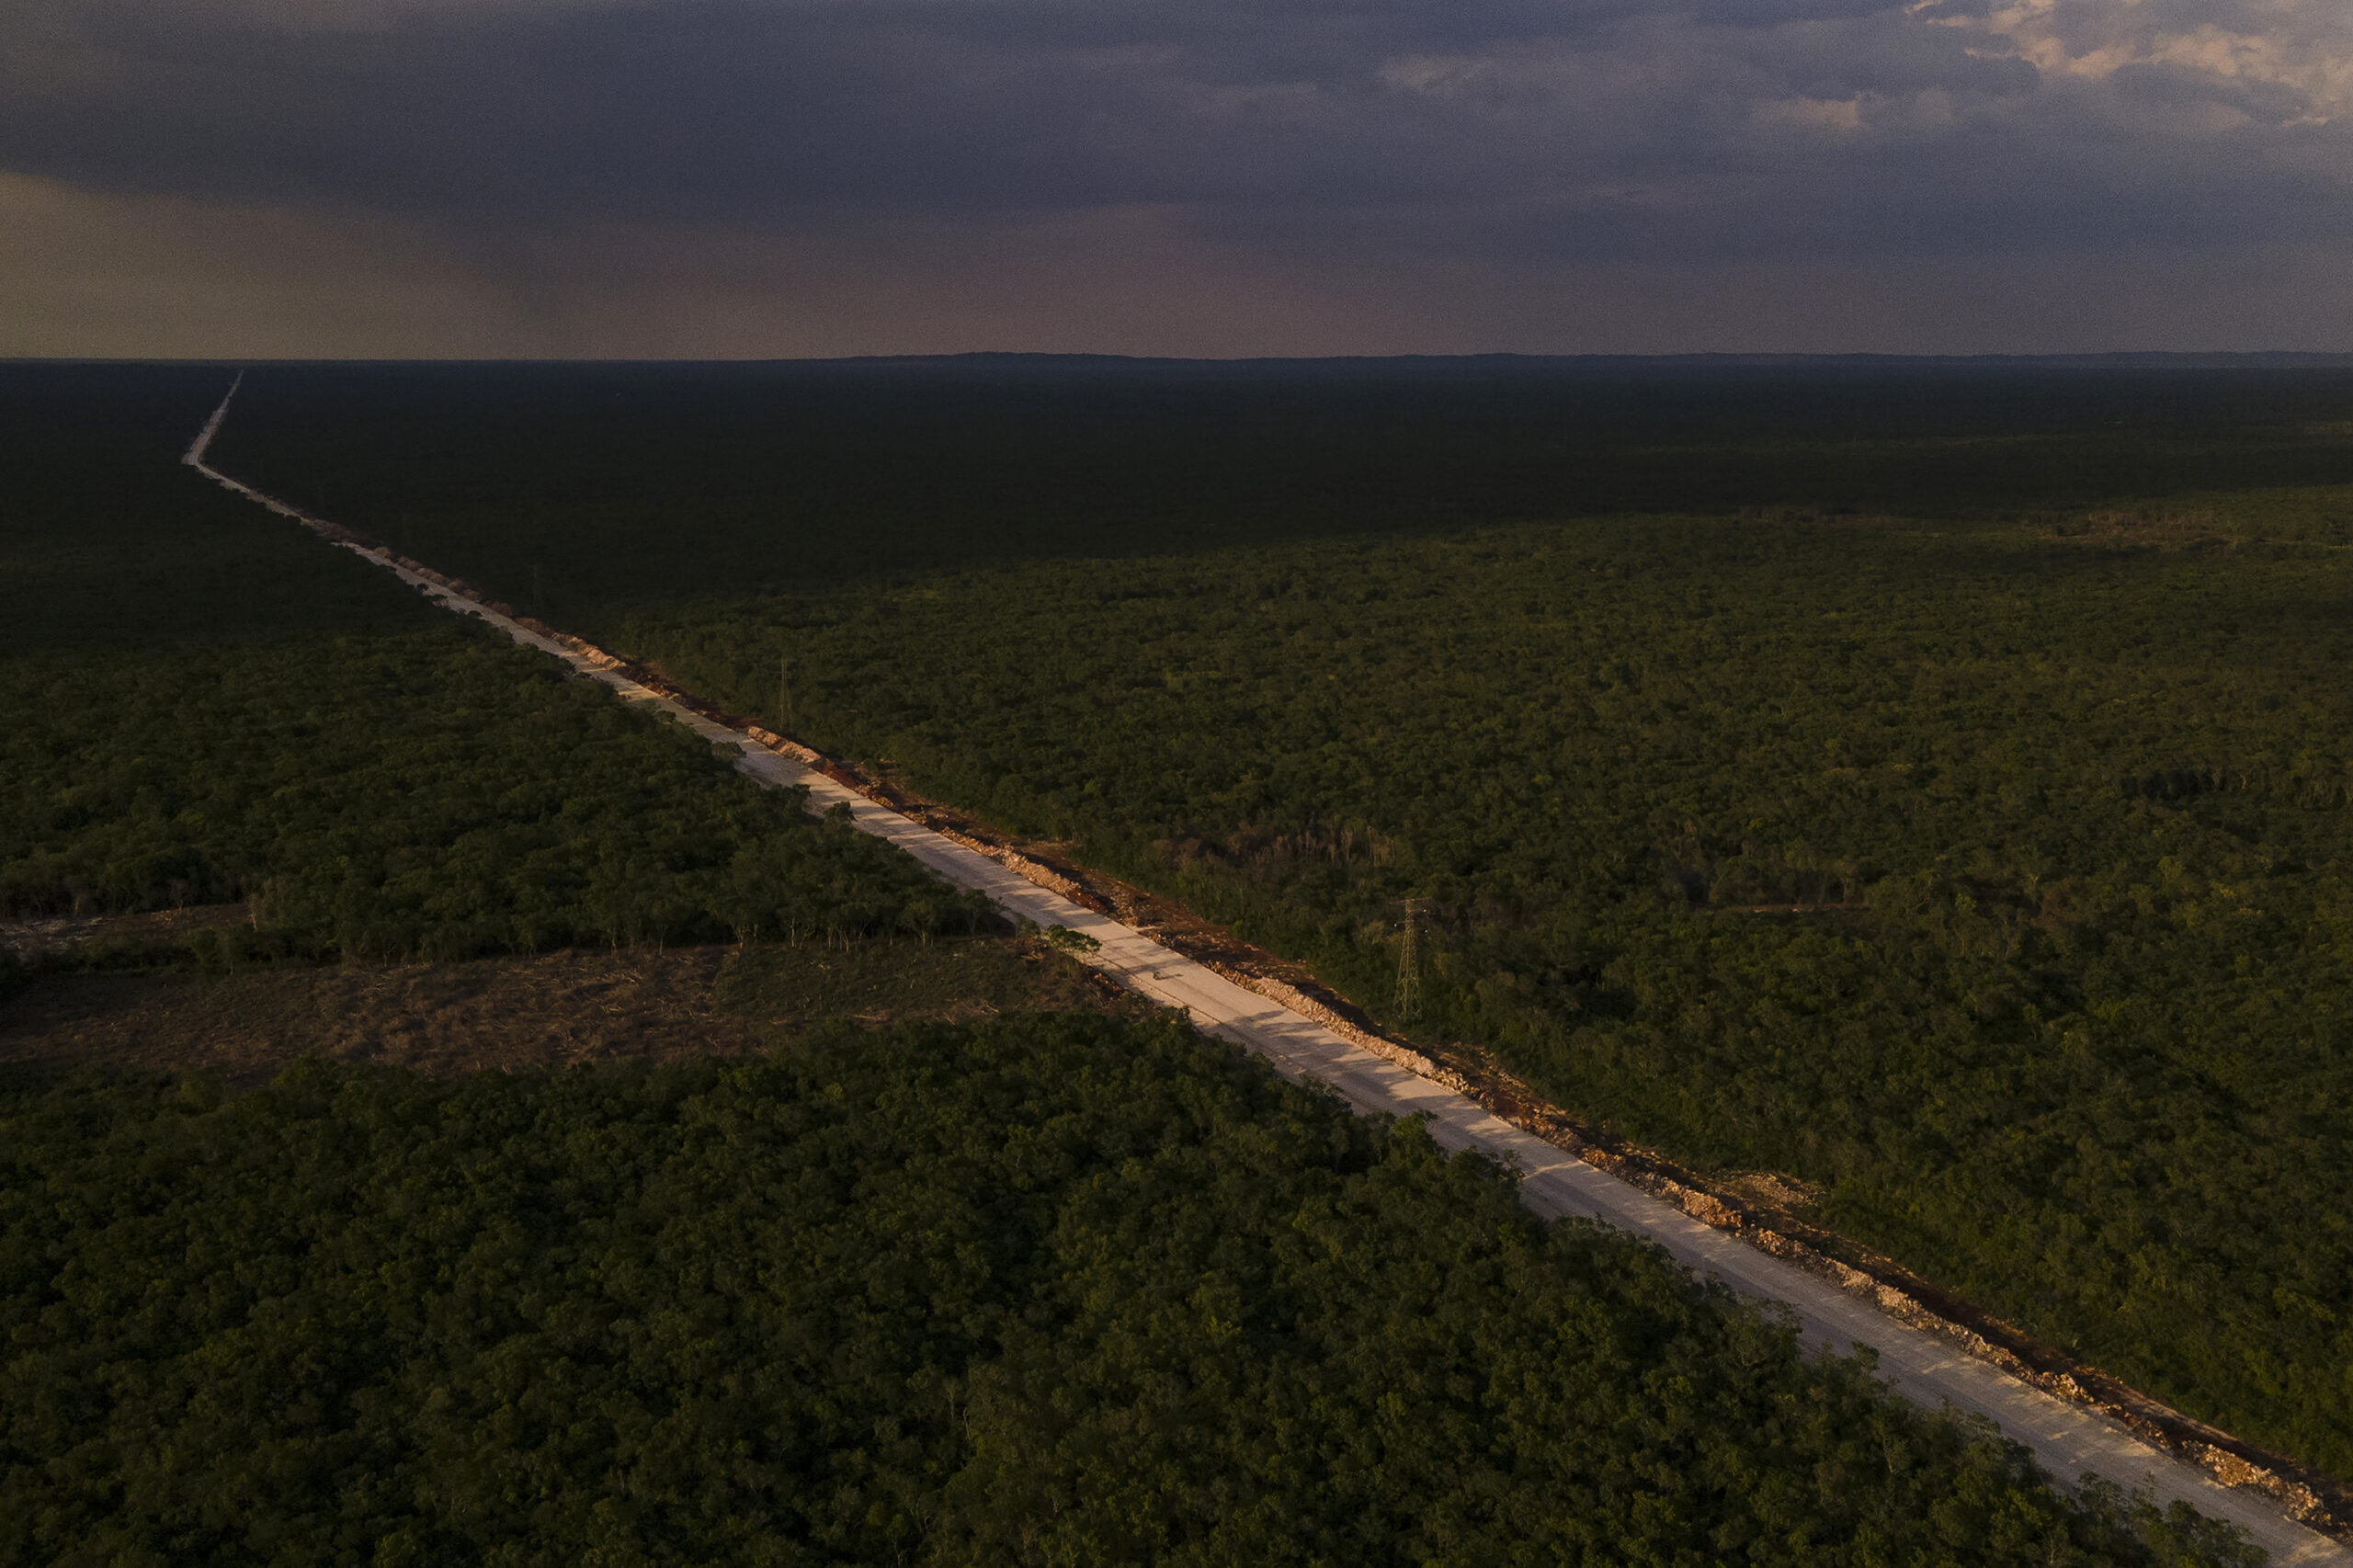 Aerial view of section 2 of the Tren Maya, which is being built near Becal, Campeche, Mexico, on May 14, 2022. Environmental activists and defenders have denounced that the work on the train will have a serious impact on the jungle ecosystem and the flora and fauna that predominate in the area.